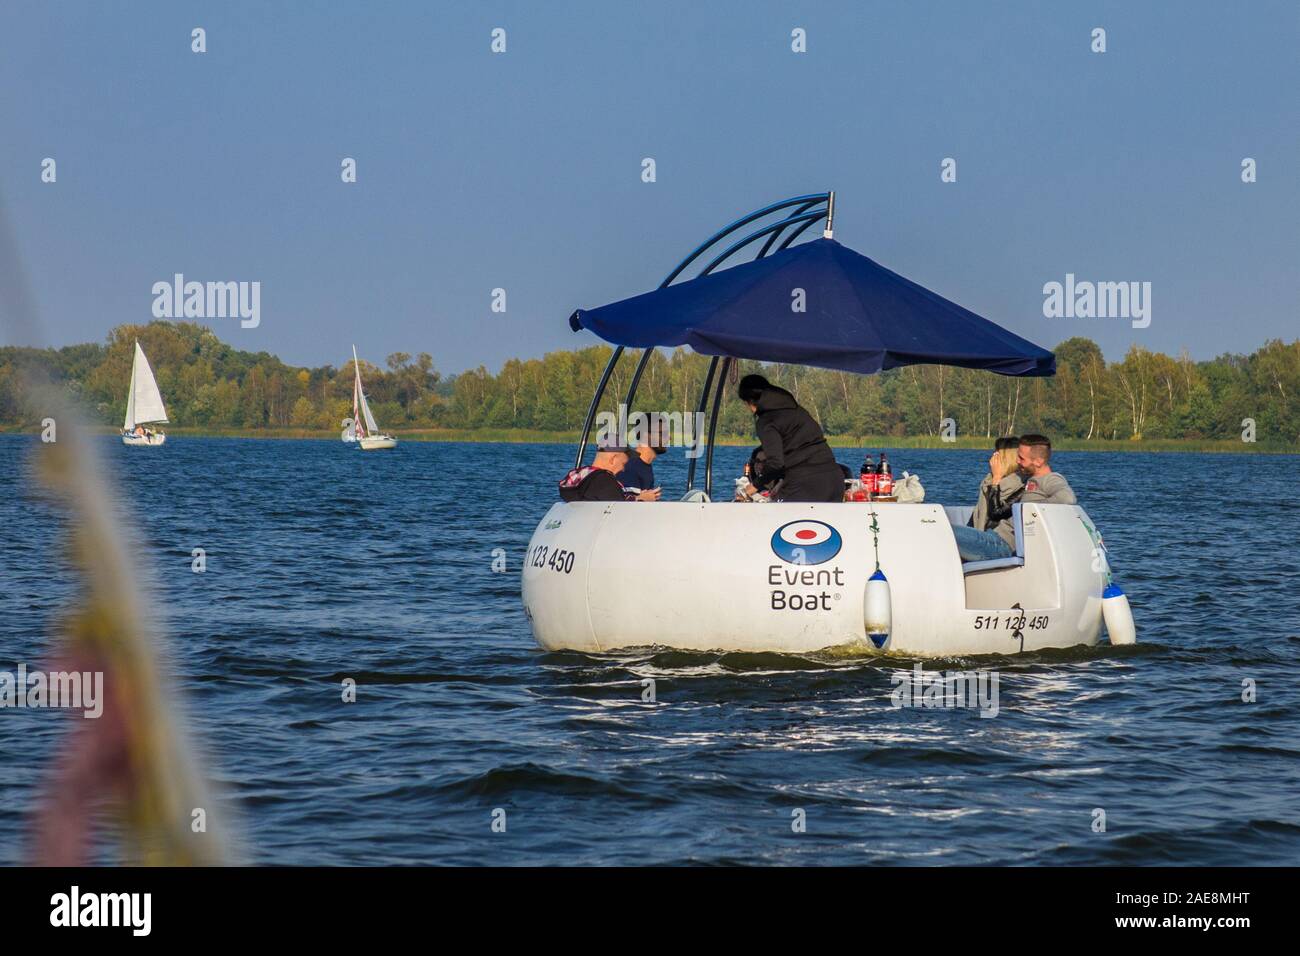 Event boat on the Zegrze Reservoir, Poland Stock Photo